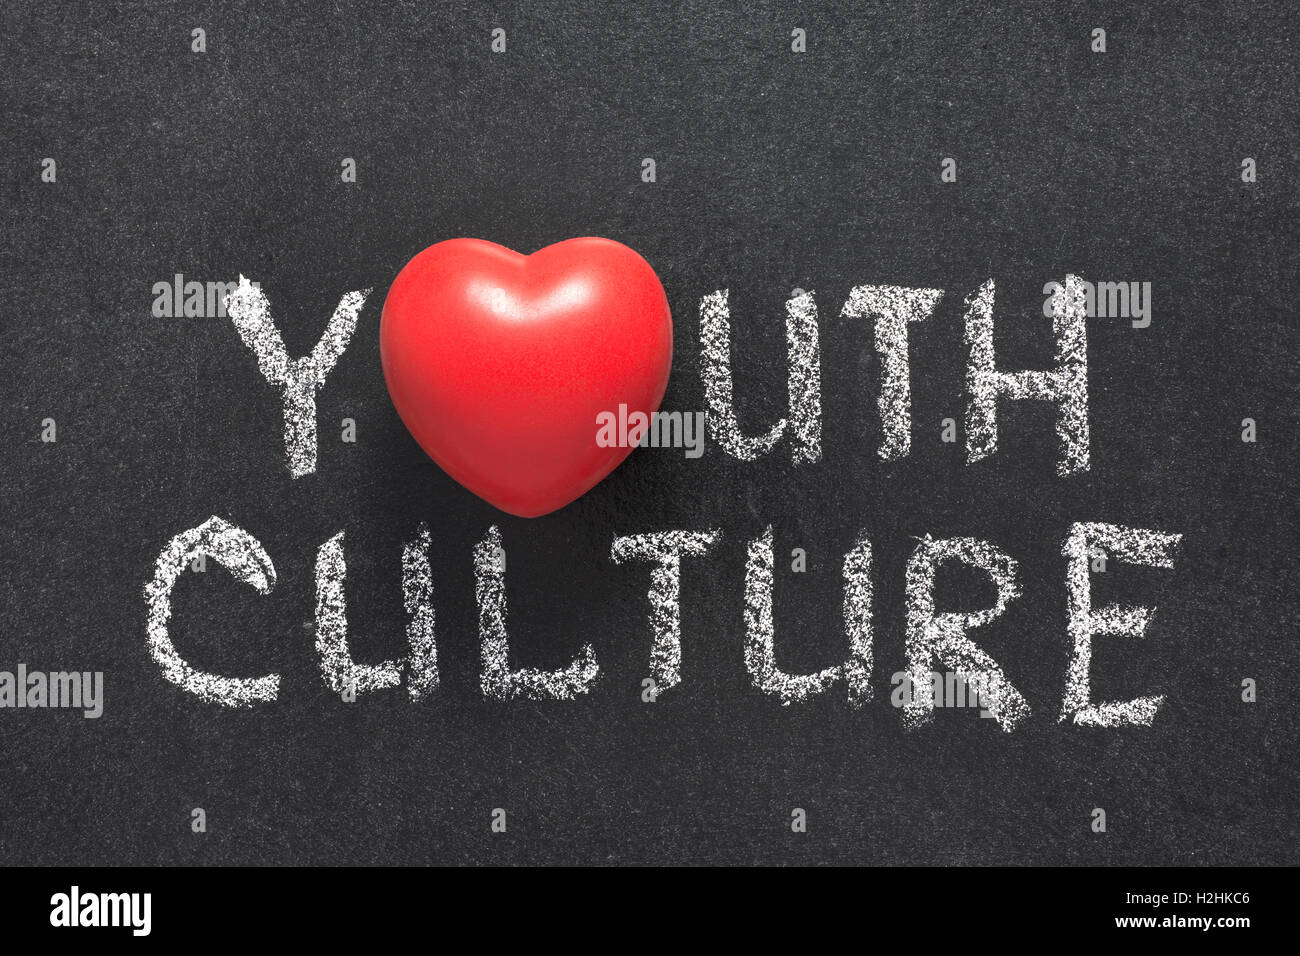 youth culture phrase handwritten on blackboard with heart symbol instead of O Stock Photo